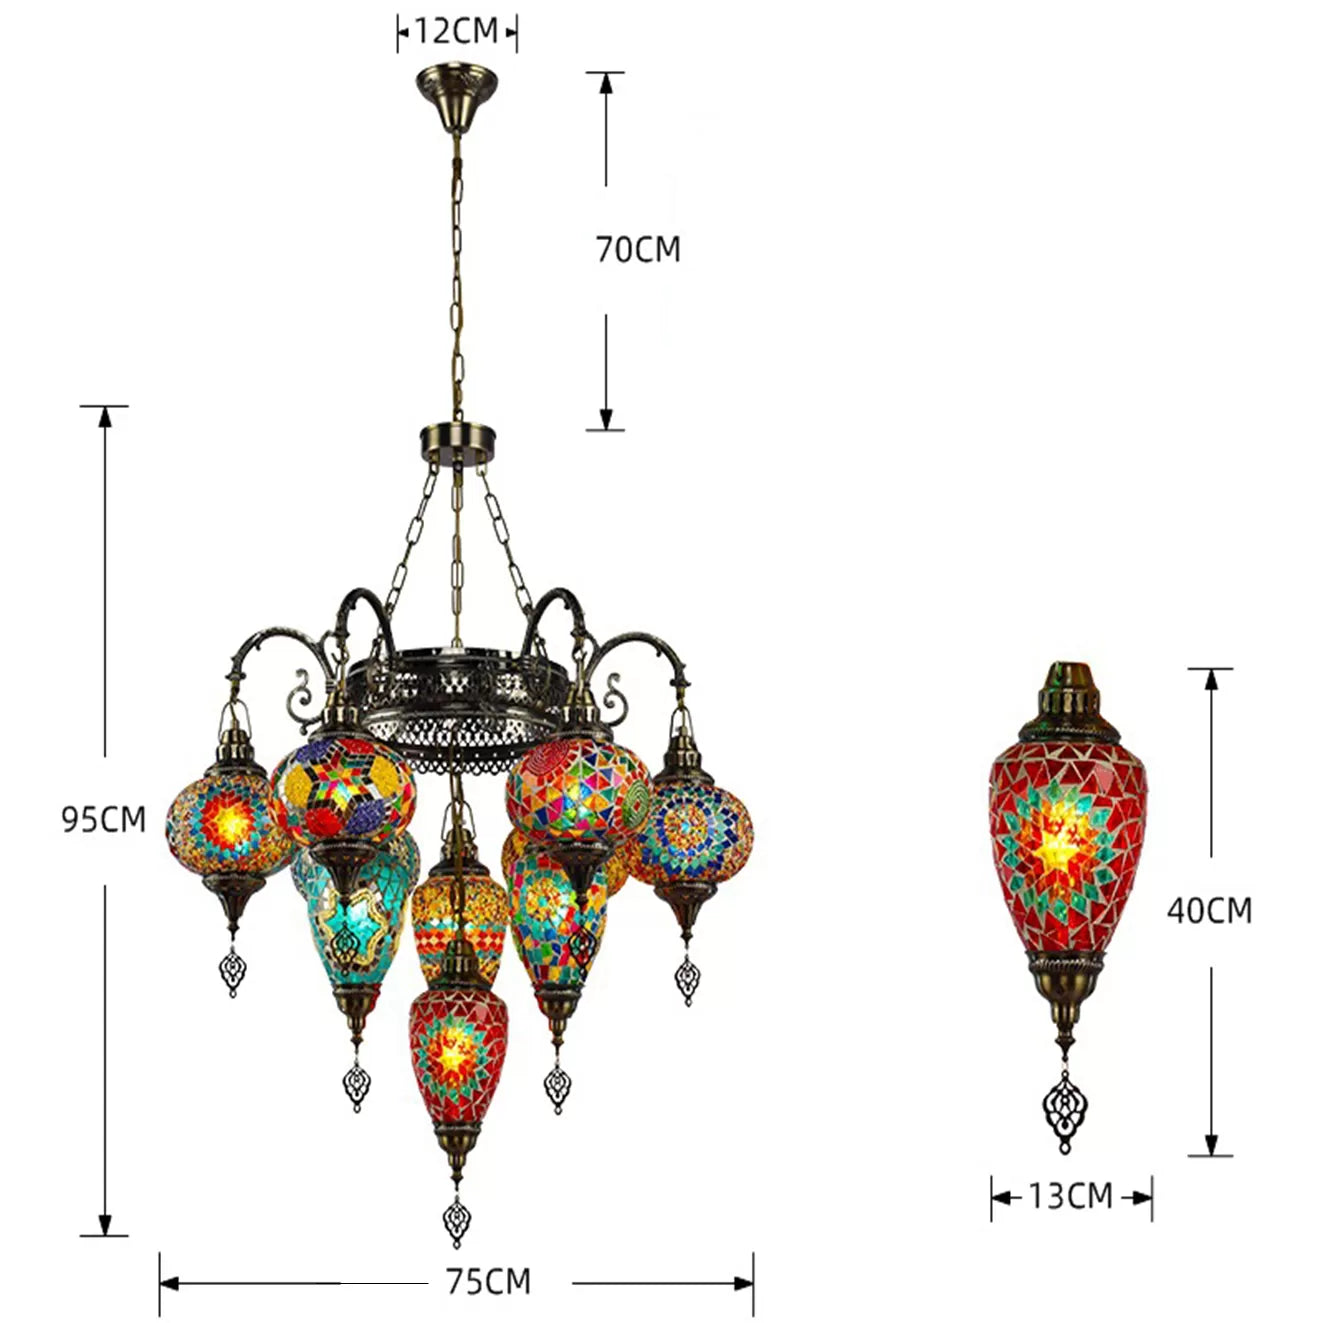 handmade-bohemian-style-ceiling-chandelier-Pandora-lamp-handcrafted-home-decor-multi-colour-beautiful-elegant-glass-metal-antique-large-for-landing-area-living-room